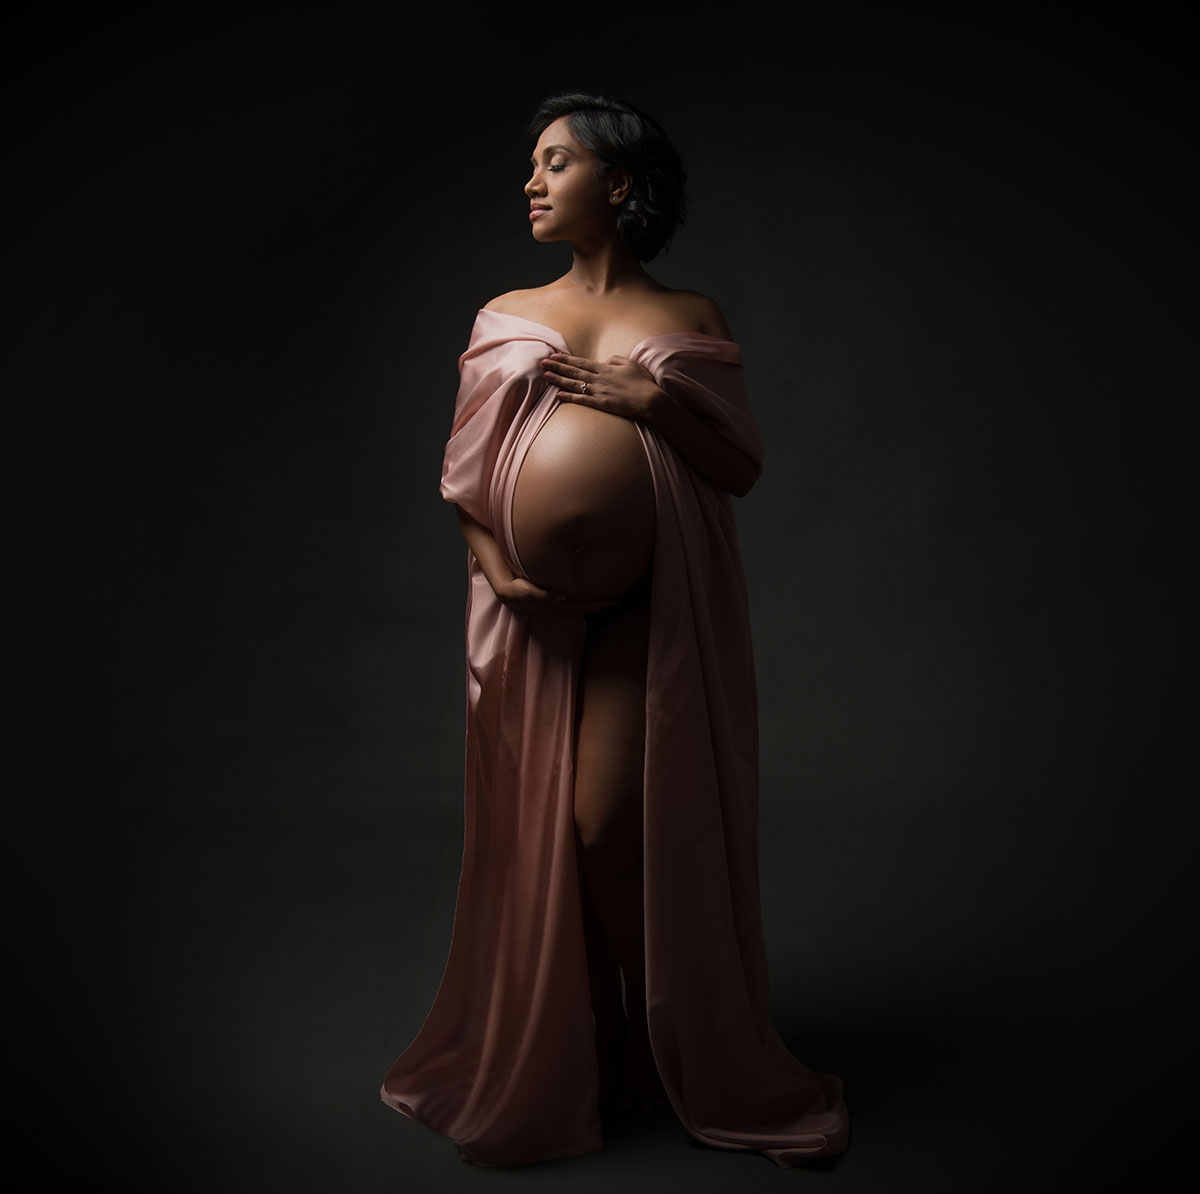 Beautiful pink fabric draped over a pregnant woman